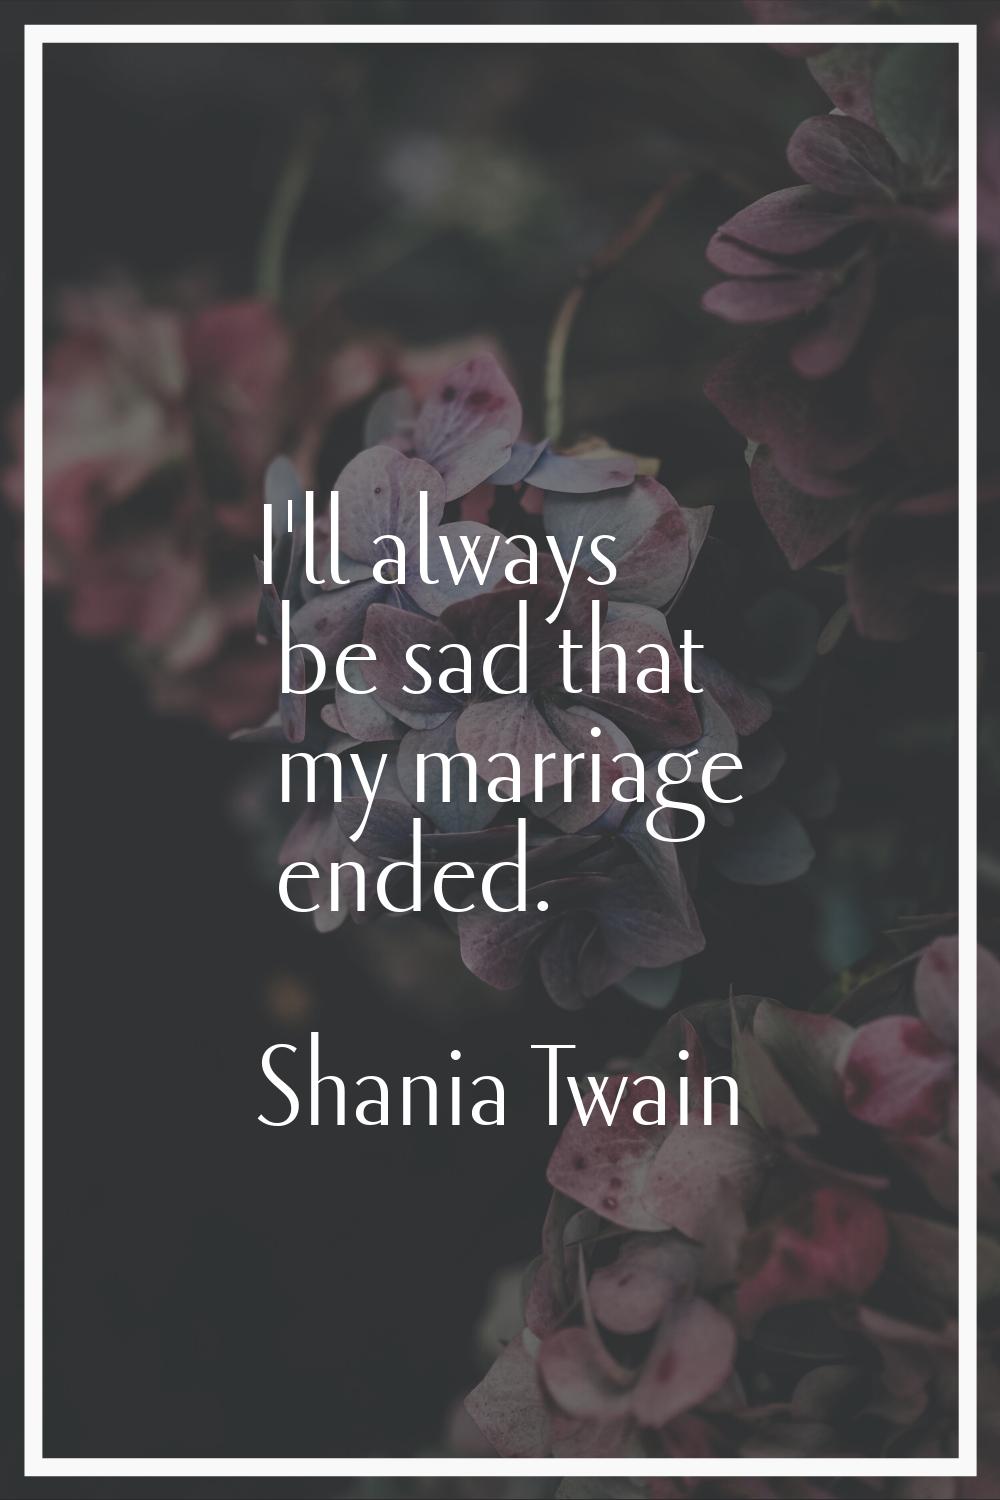 I'll always be sad that my marriage ended.